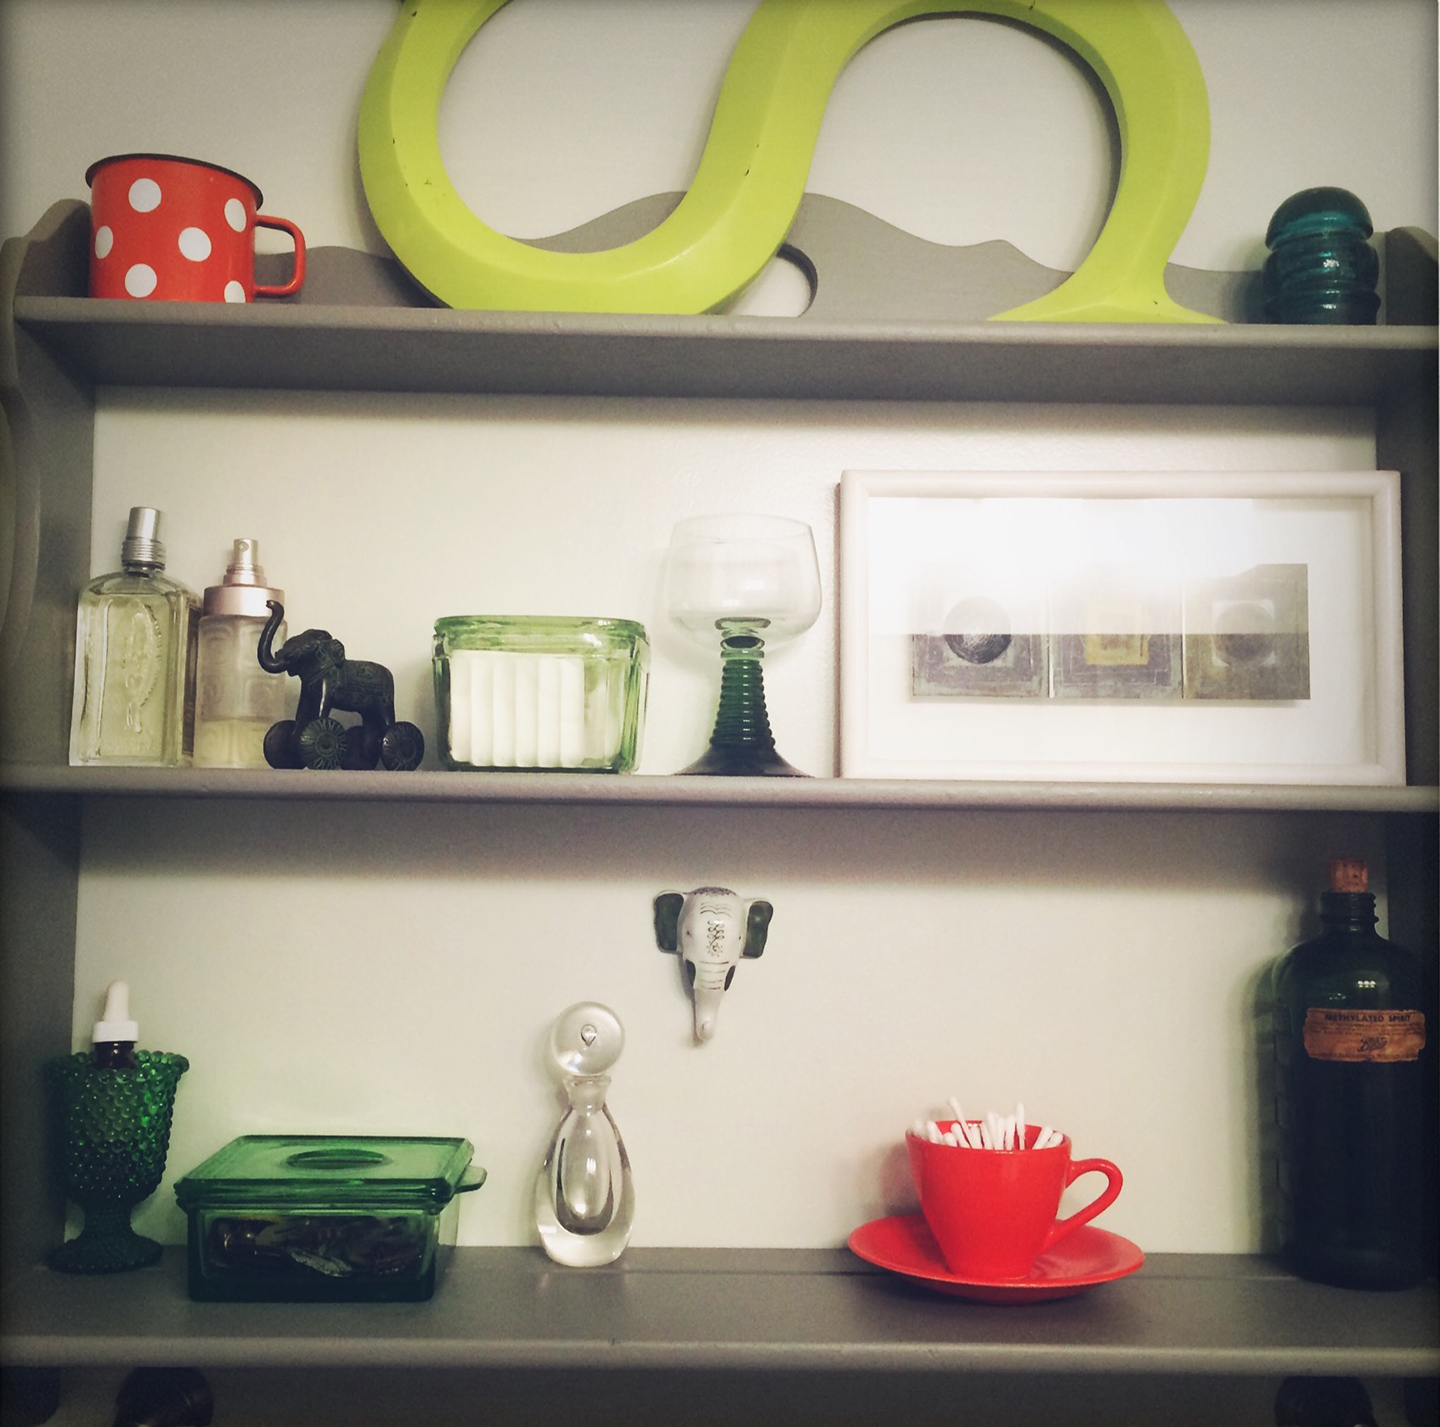 Here’s a peek at my bathroom shelves (I know! Seems strange but my bathroom is one of my favourite rooms in my apartment. Really!) as they are an indicator of my eclectic taste. I love objects and I collect a variety of things, each with their own significance. I could spend hours happily rearranging all of these items and then adding and subtracting more and less. I adore composition and it doesn’t always have to be letterforms. The sentiments are often emotional, such as the polka-dotted tin cup that I loved from my childhood, the porcelain elephant head from India, the electrical insulator and the german wine glass from my great grandmother’s house, or the painting from Martin Andrews, a Typography Professor from the University of Reading. Other objects are admired for their color, the orange cup and saucer from a thrift store; their form, my grandmother’s perfume bottle; or their history, the vintage medicine bottle from a boot sale in Reading.